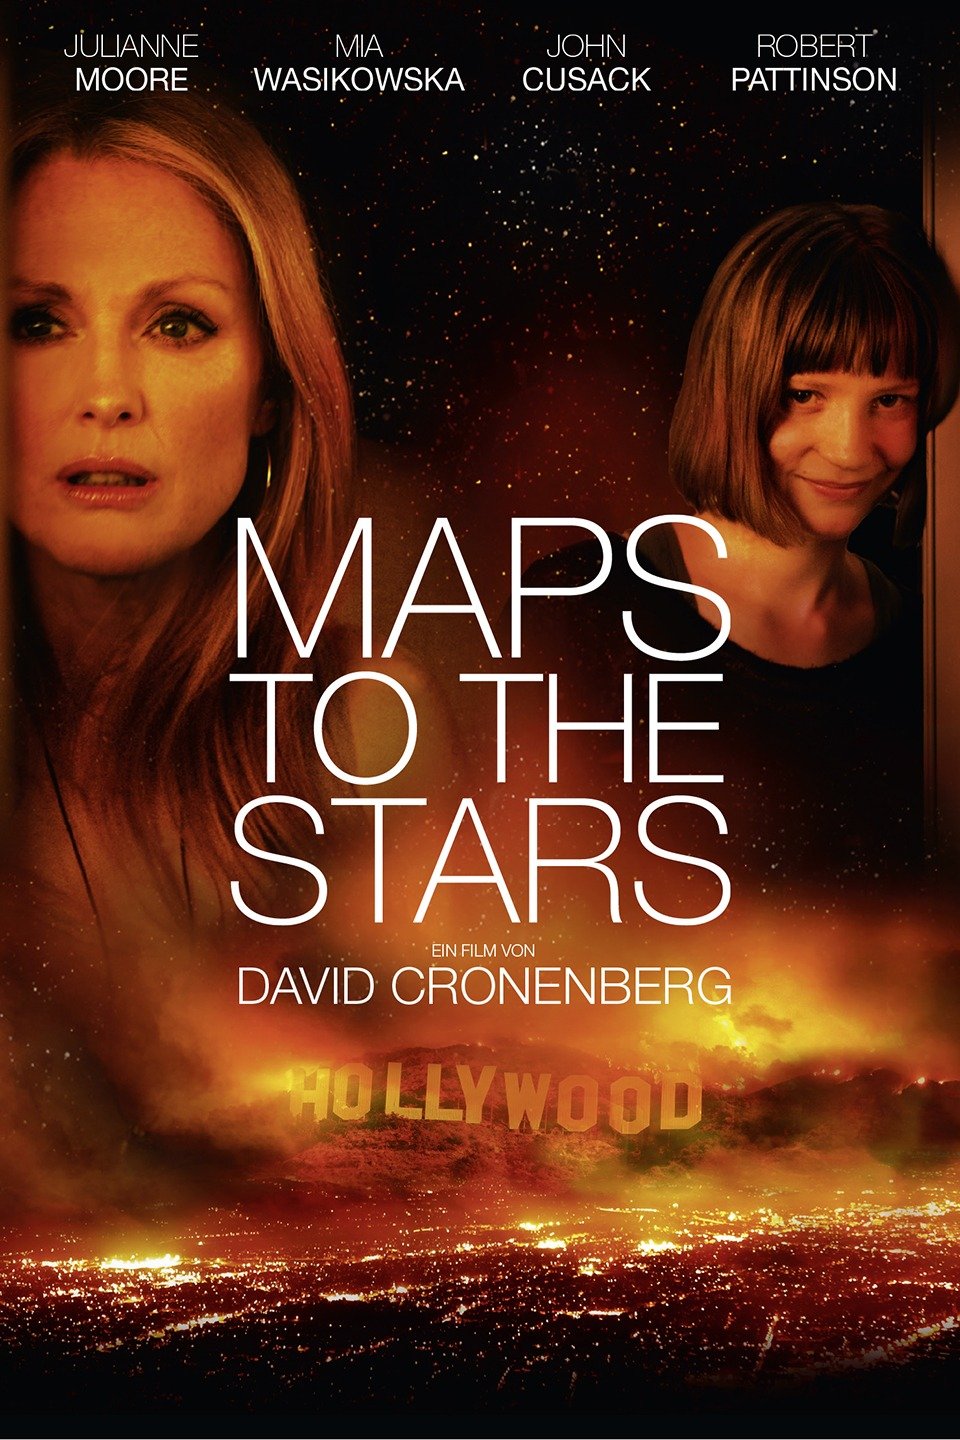 Maps to the Stars: A Deep Dive into Hollywood's Dark Side